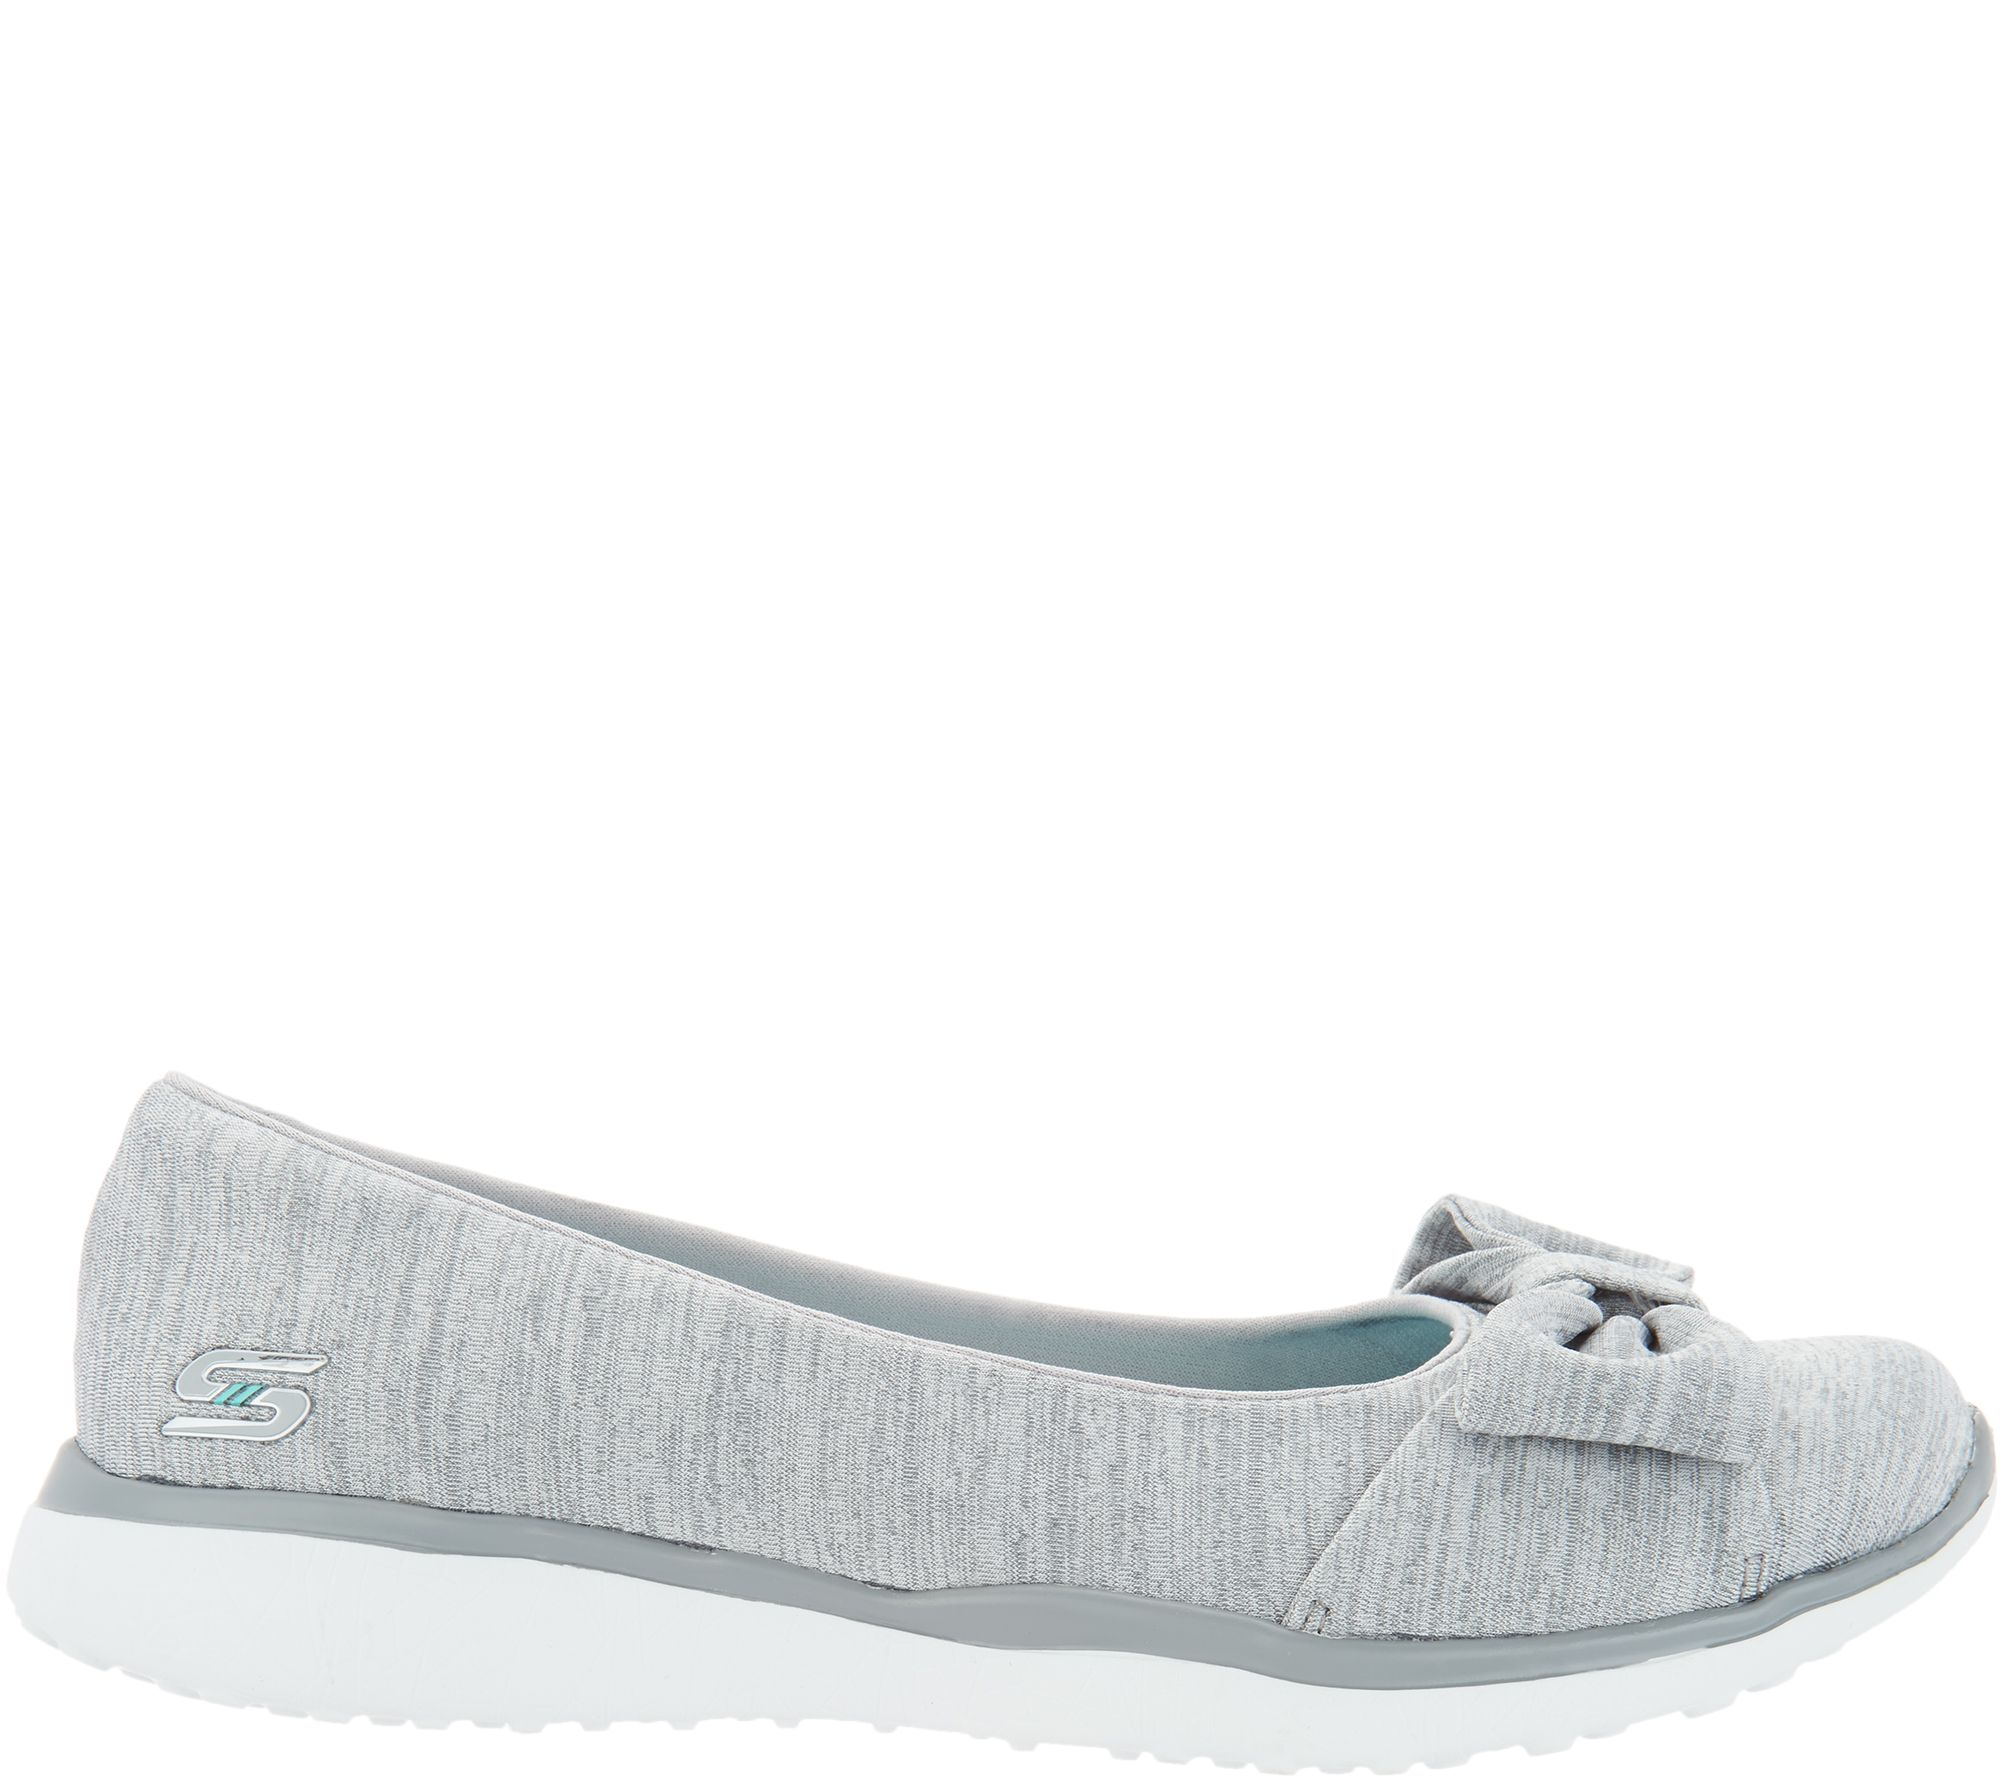 skechers jersey bow skimmers